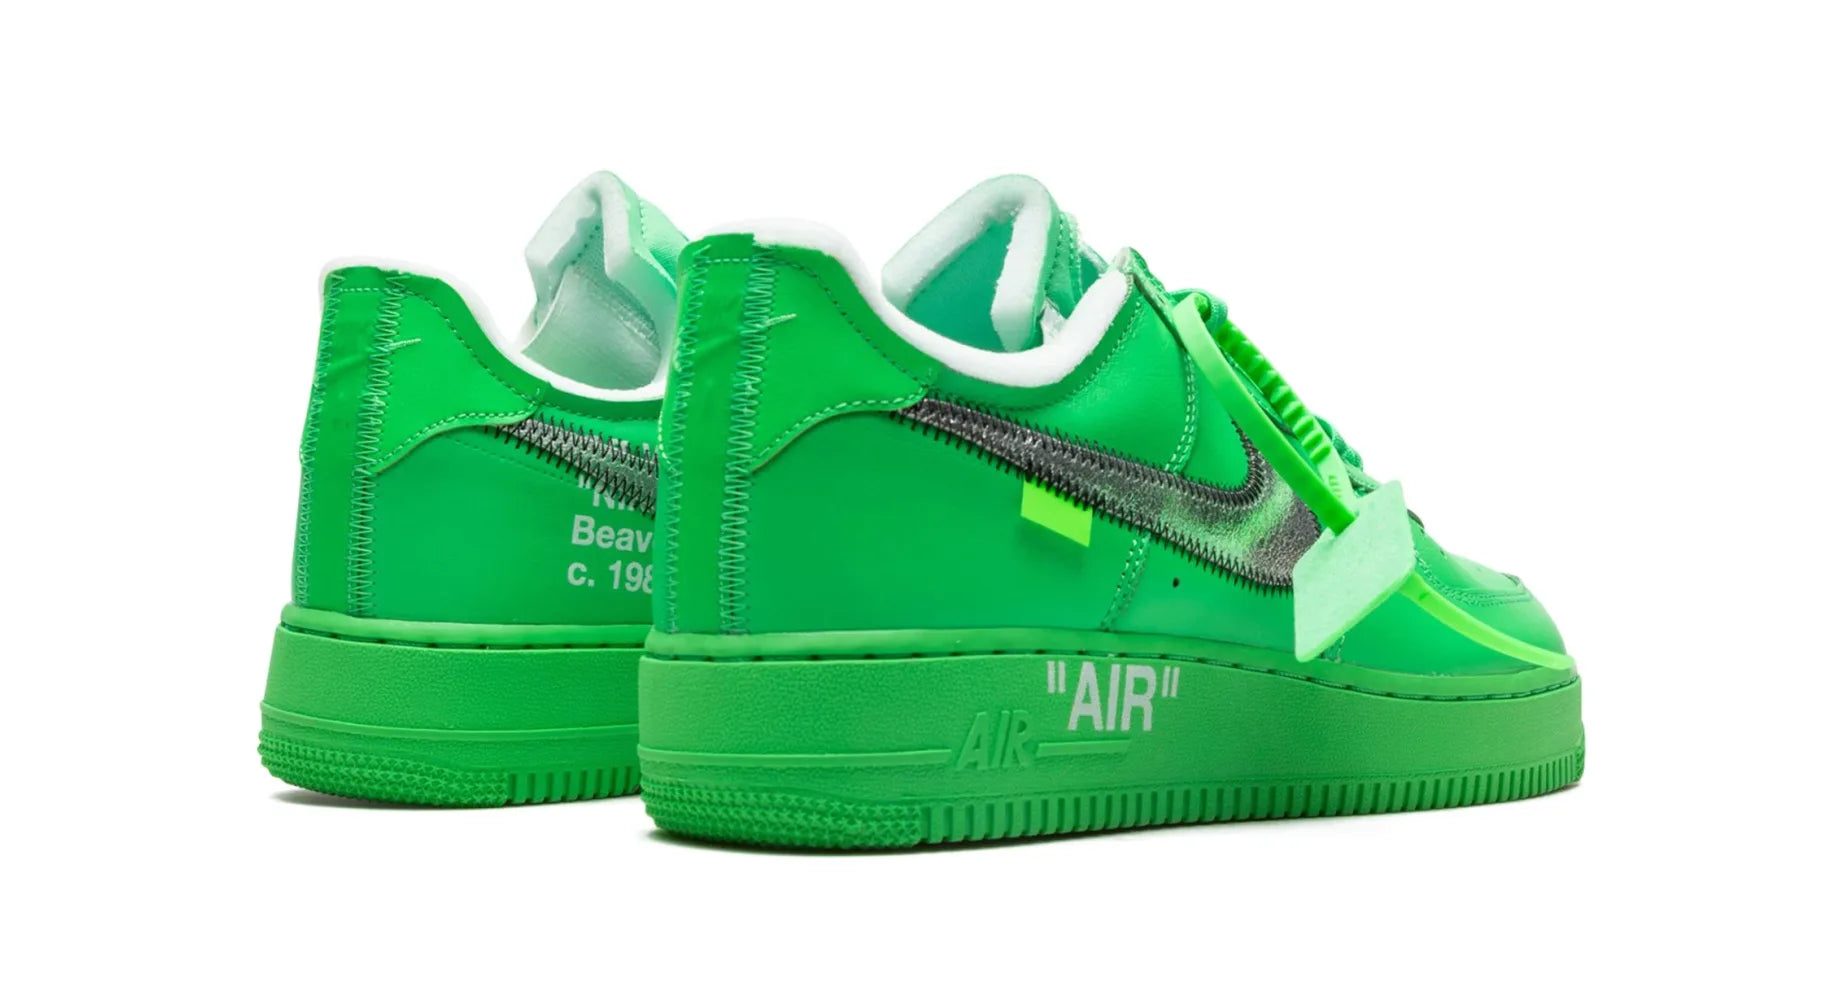 Nike Air Force 1 Low Off-White Light Green Spark Comes with box